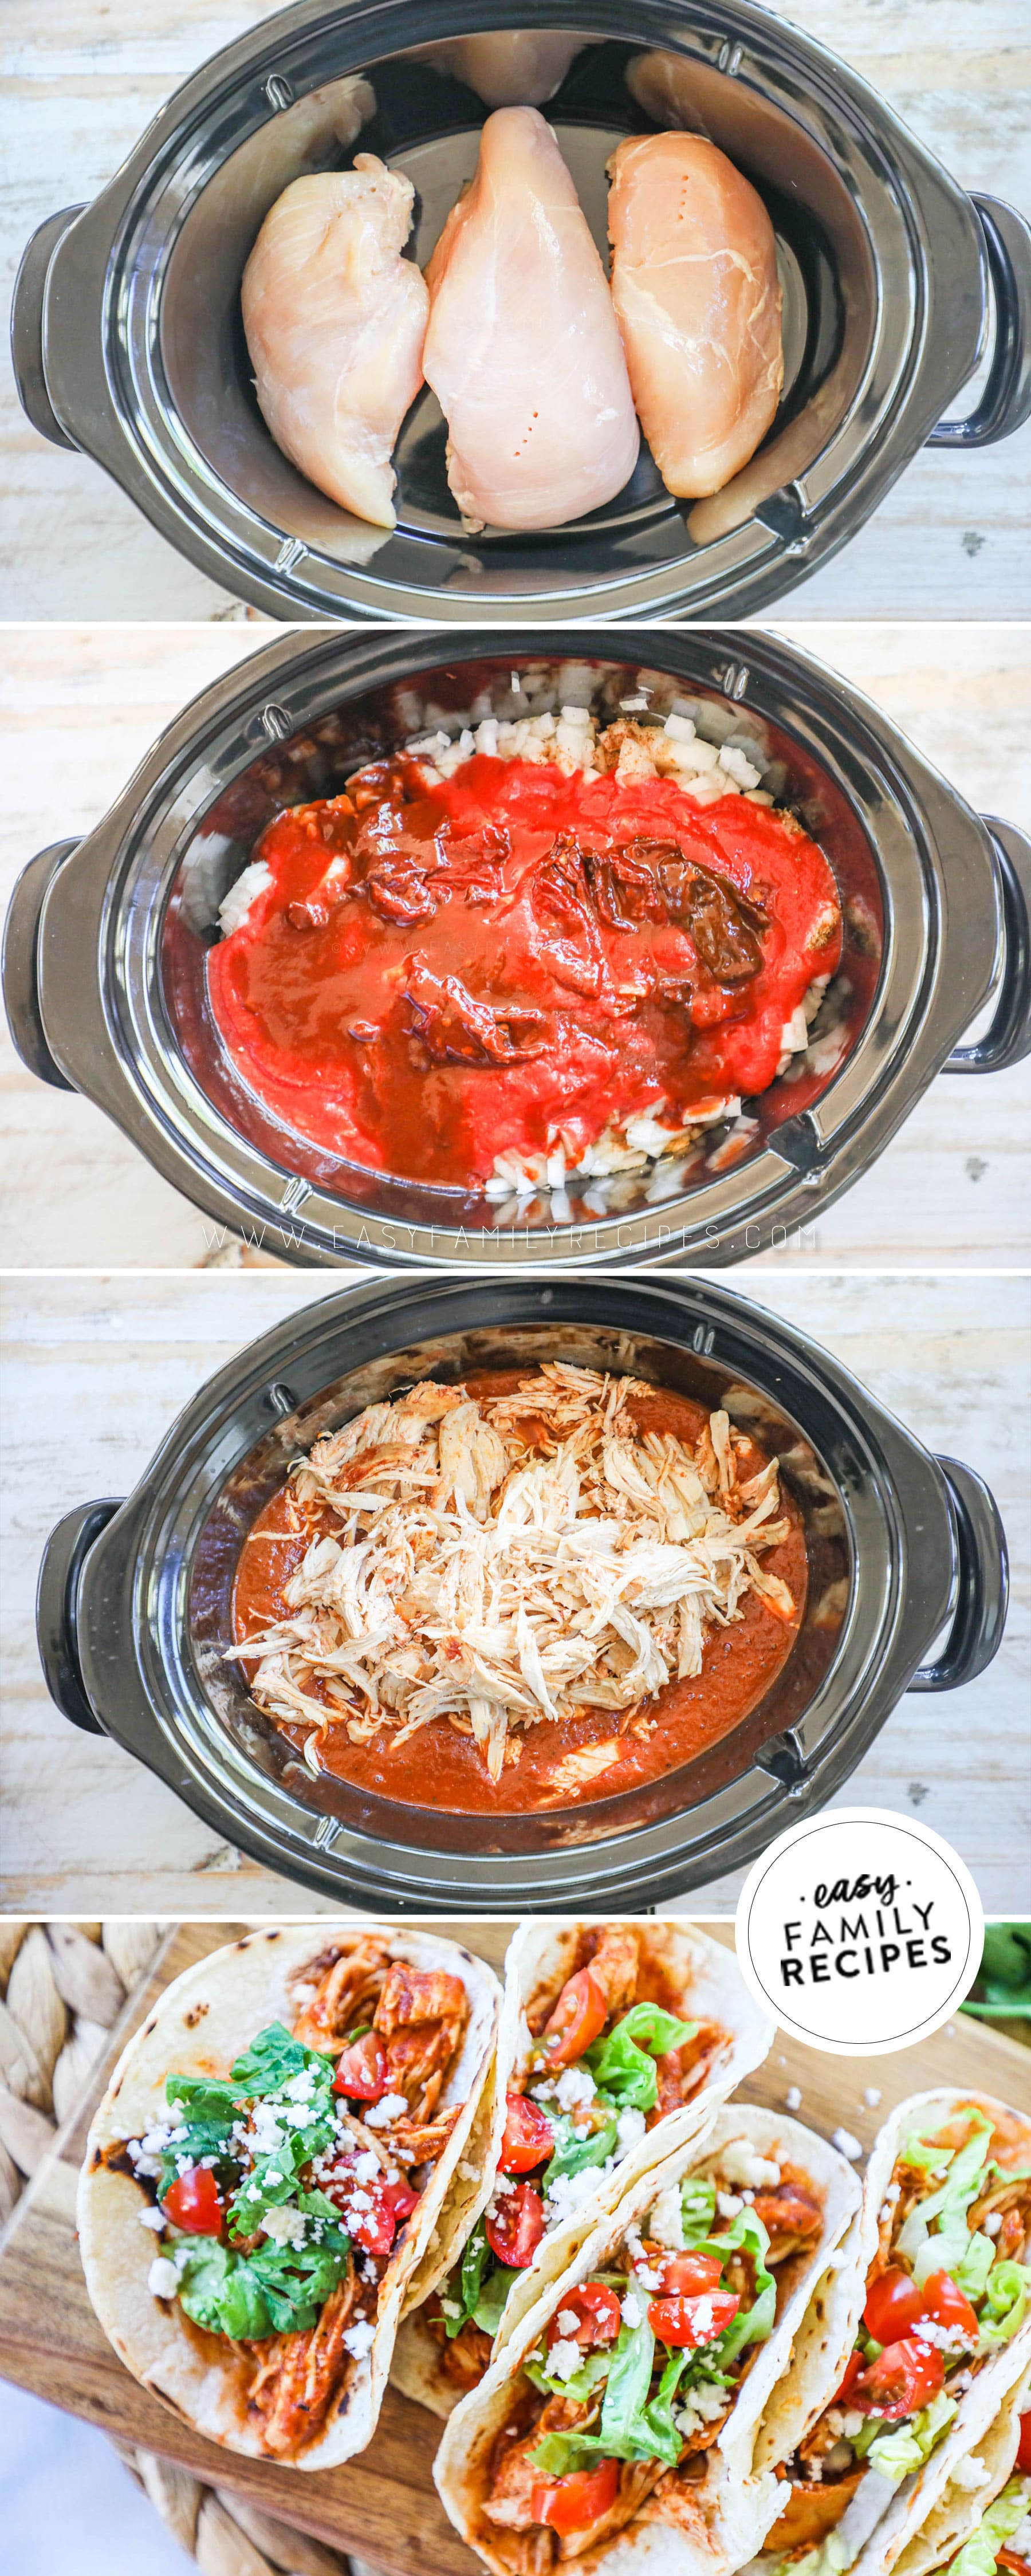 4 image collage showing chicken breast on bottom of slow cooker, then topped with remaining ingredients, then showing the chicken shredded in sauce after cooked, and then chicken tinga tacos assemble in corn tortillas.